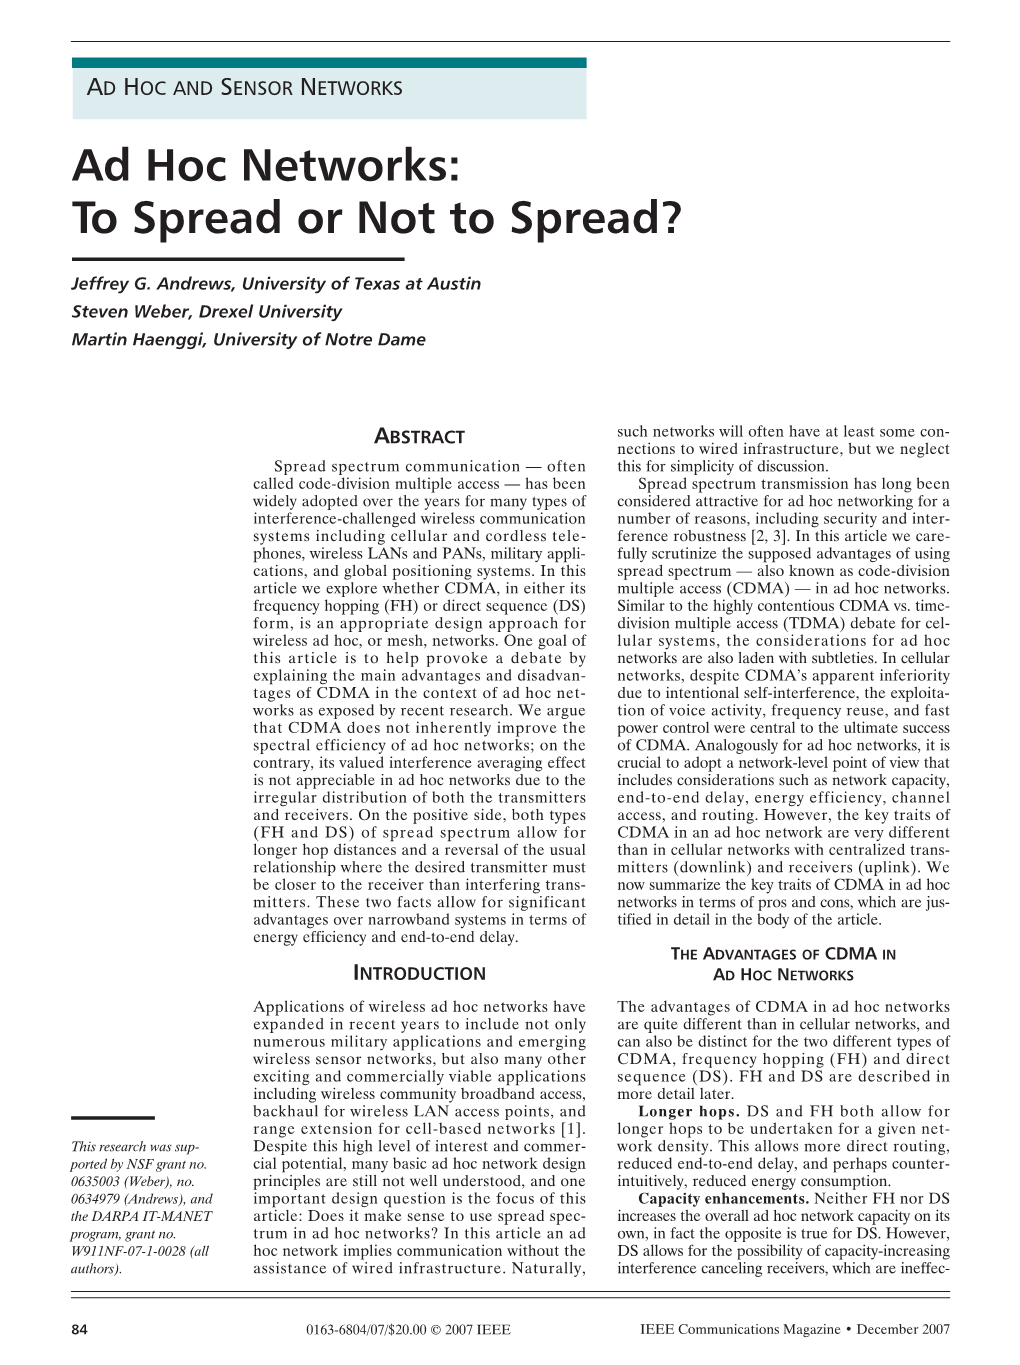 Ad Hoc Networks: to Spread Or Not to Spread?